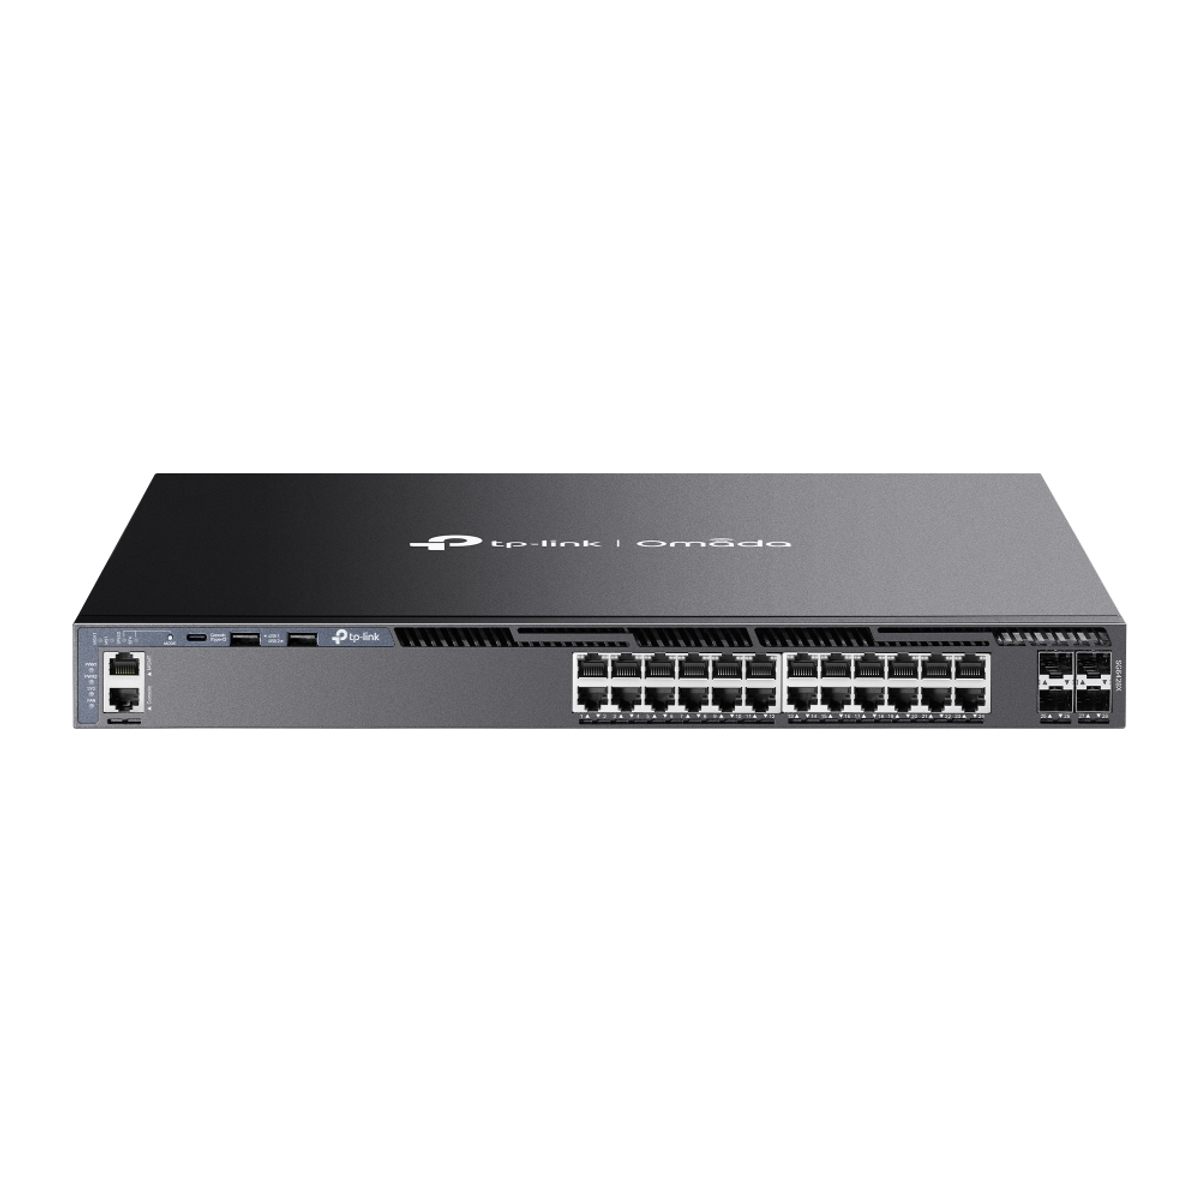 24-P L3 Managed Switch With 4 10G Slots